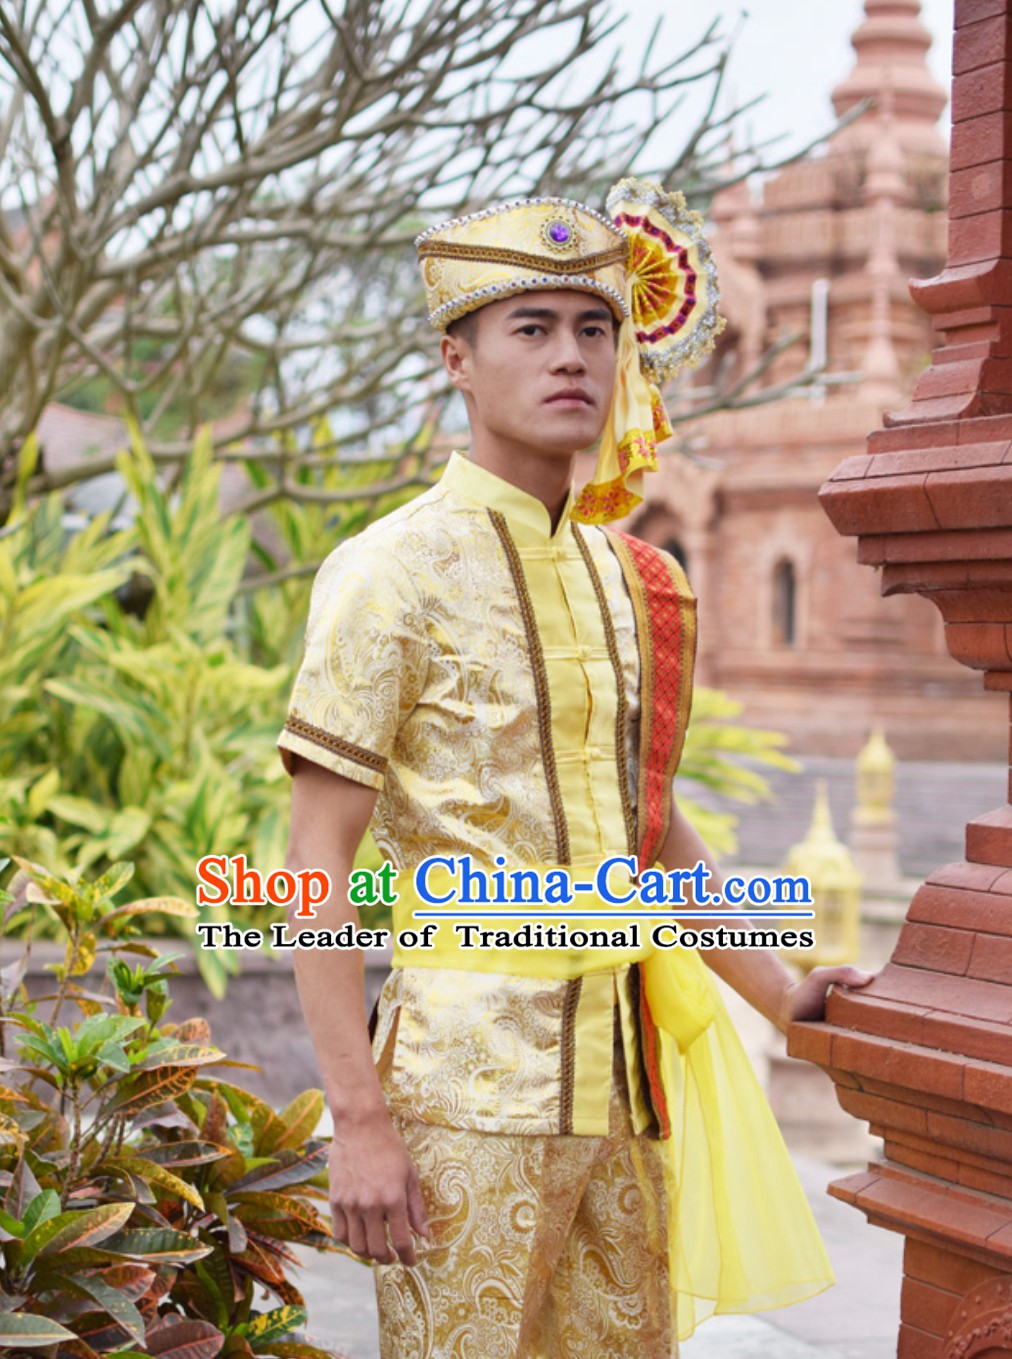 Top Traditional National Thai Dress Thai Traditional Dress Dresses Wedding Dress online for Sale Thai Clothing Thailand Clothes Complete Set for Men Boys Youth